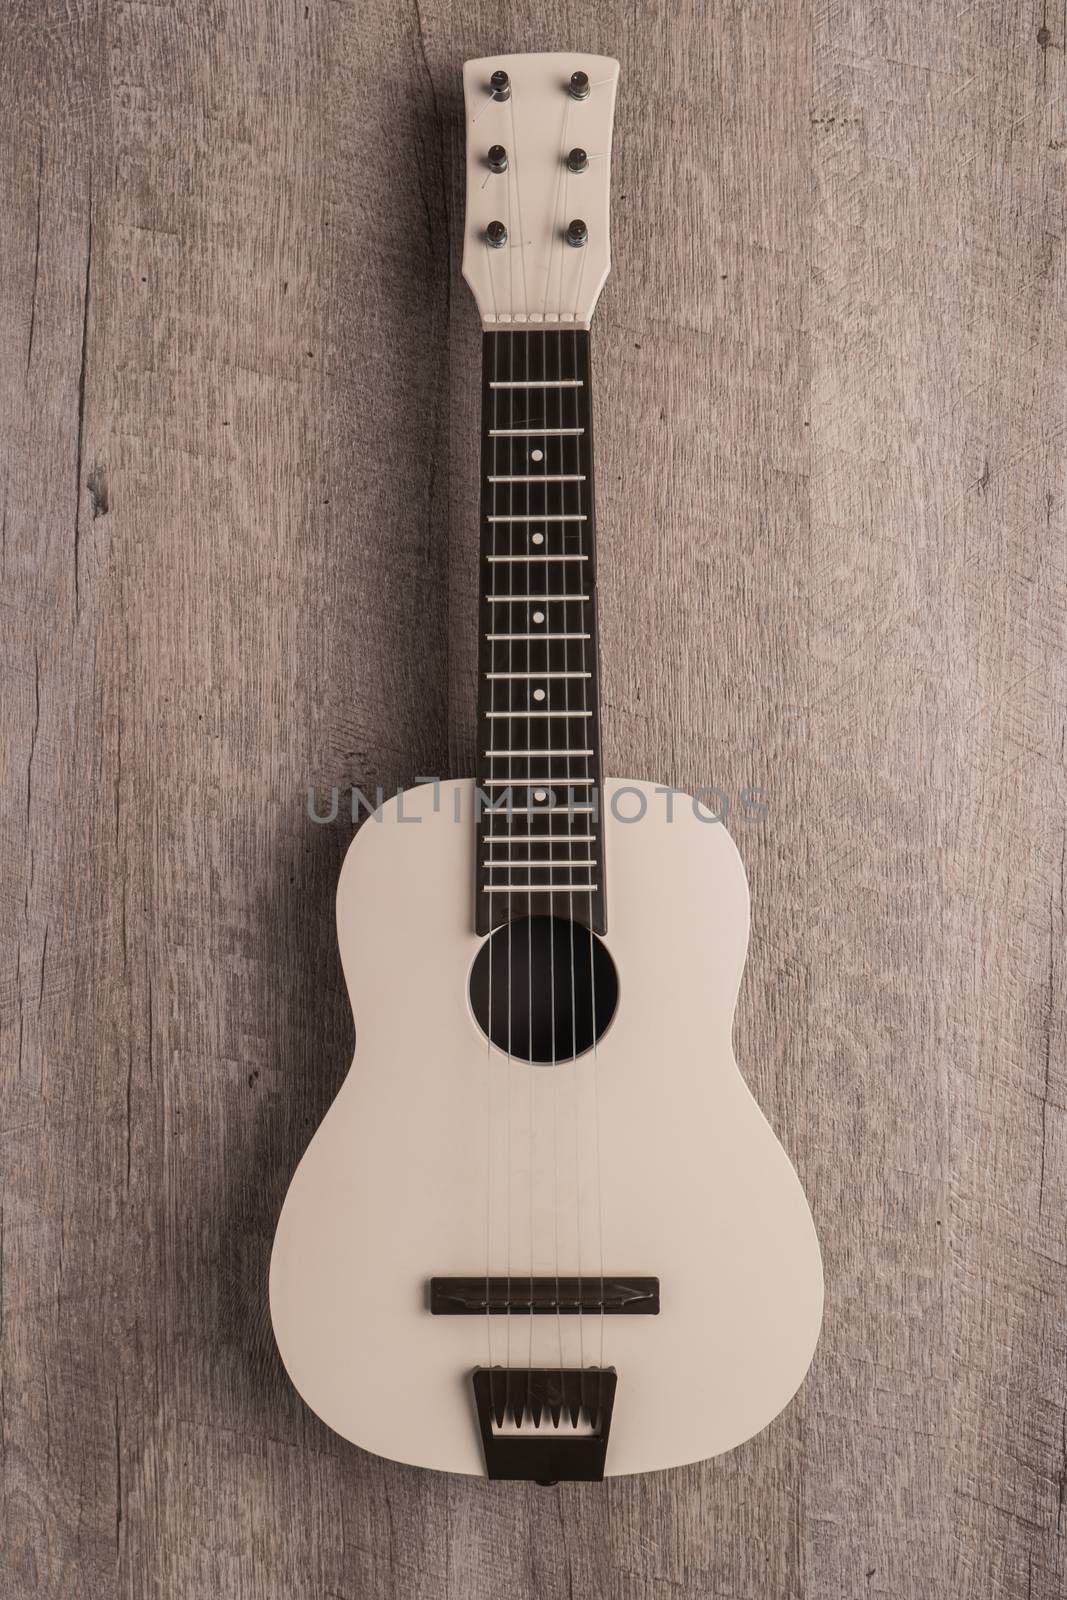 Guitar on rustic wooden background by AnaMarques